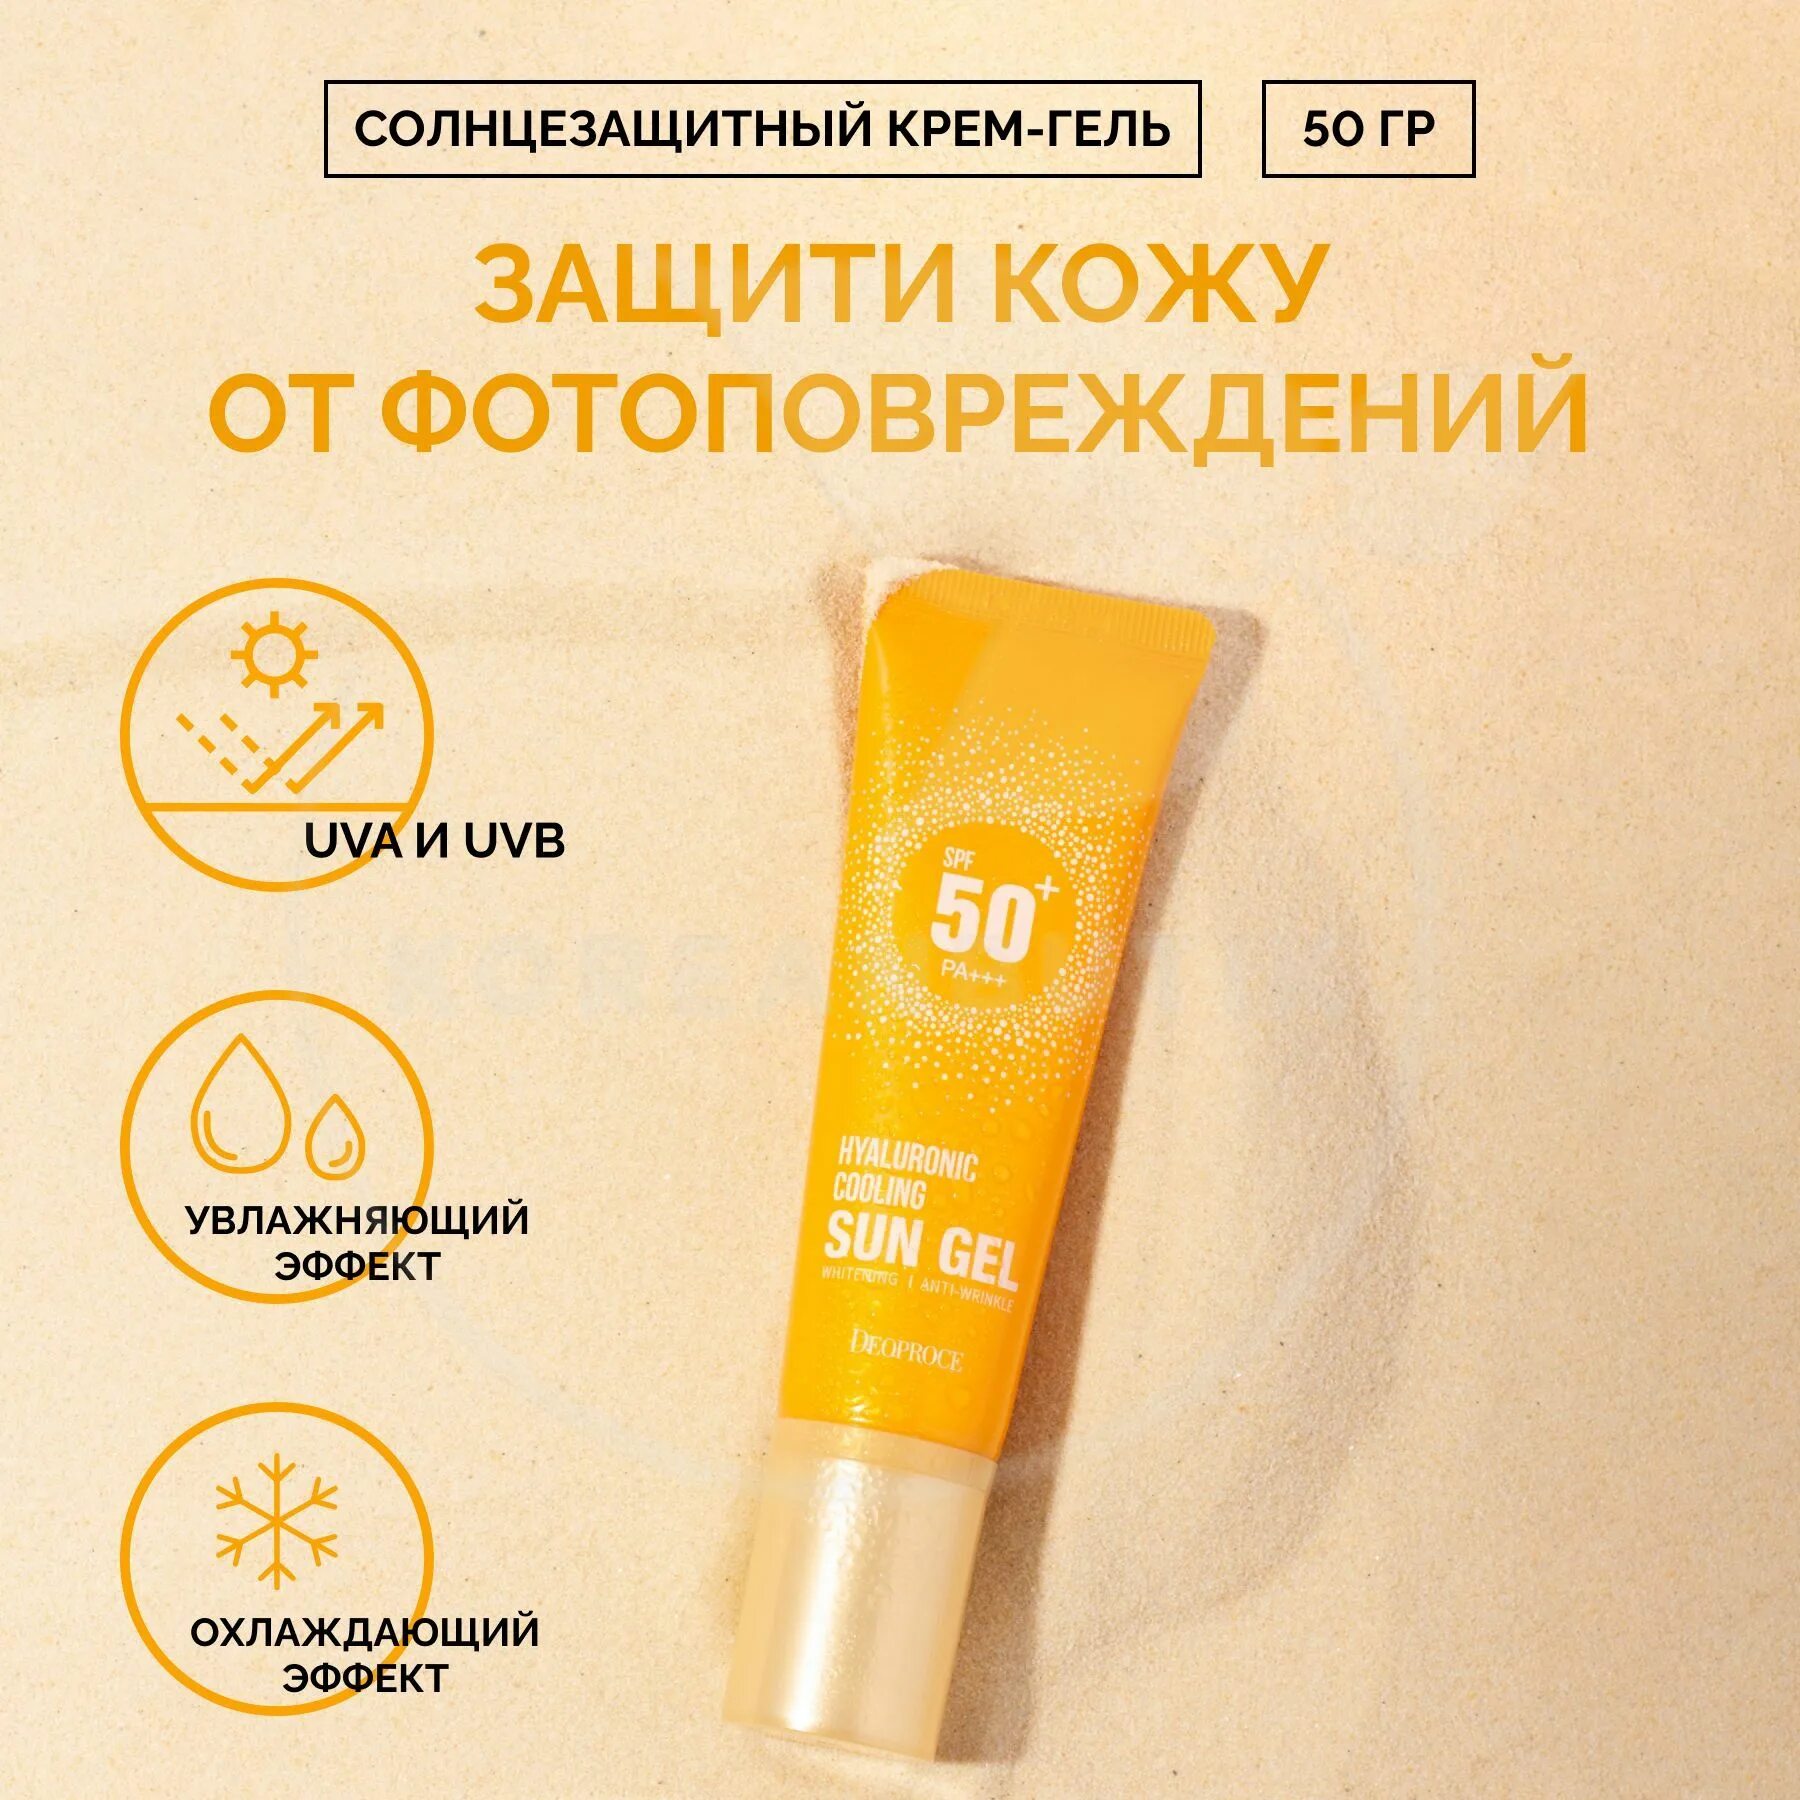 Deoproce солнцезащитный гель SPF 50. Гель солнцезащитный освежающий Deoproce Hyaluronic Cooling Sun Gel spf50++. Deoproce Sun Gel 50+ Hyaluronic Cooling. Deoproce Sun Gel 50+ гель. Deoproce sun gel